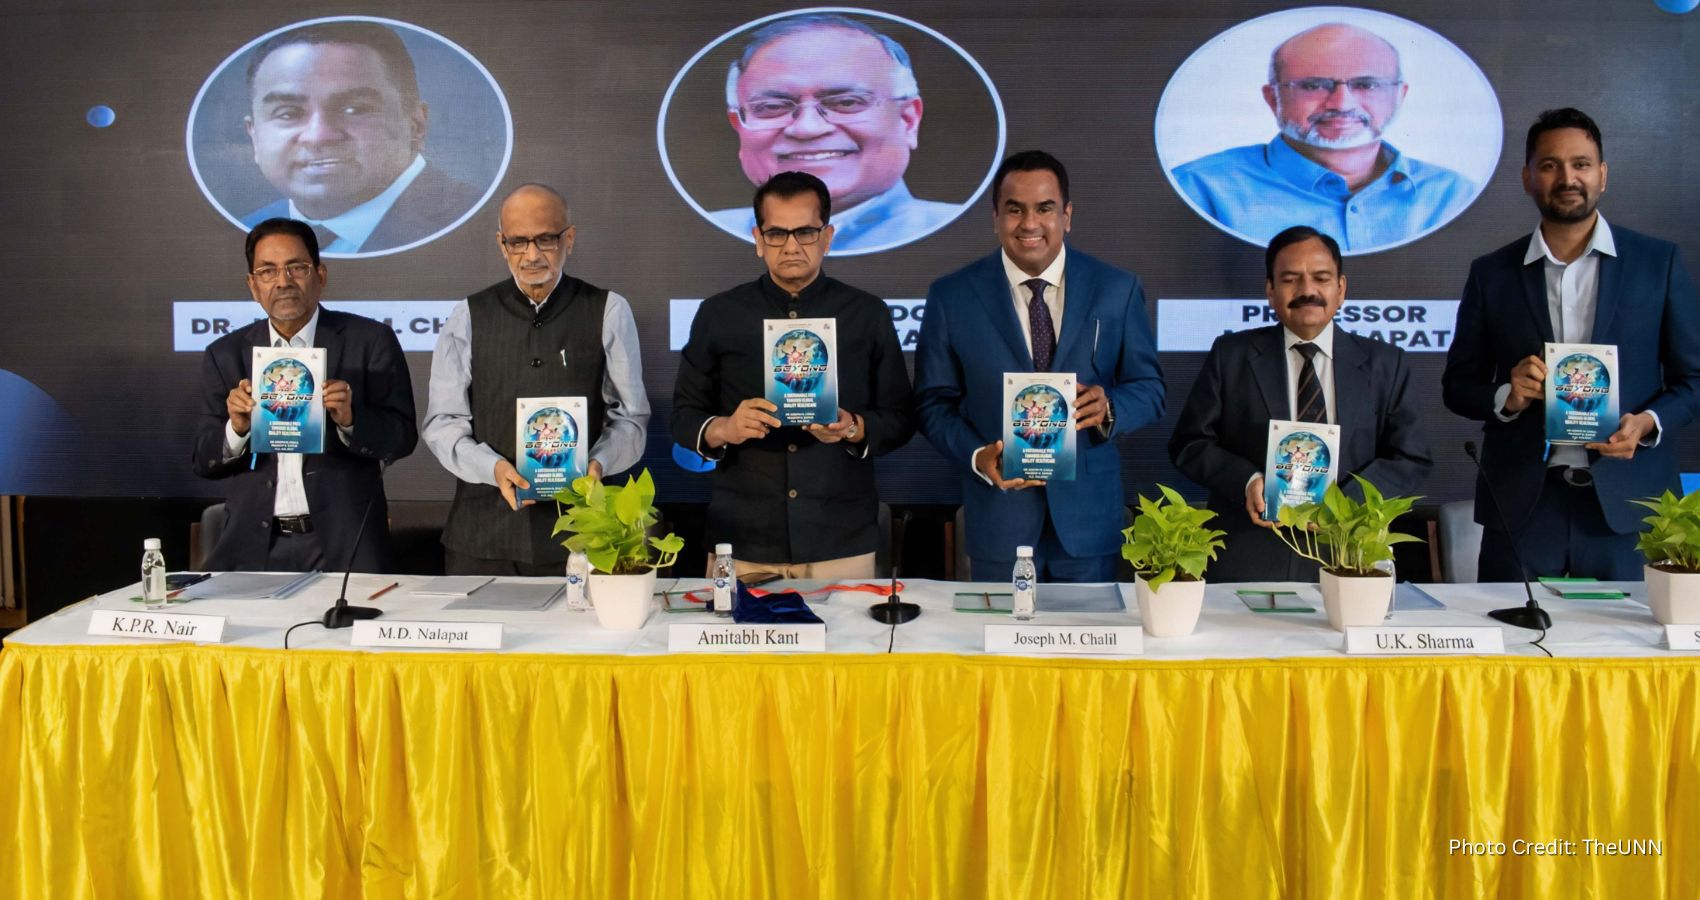 “India Beyond the Pandemic” Book Launch Held in New Delhi, Receiving Instant Bestseller Status and Acclaim